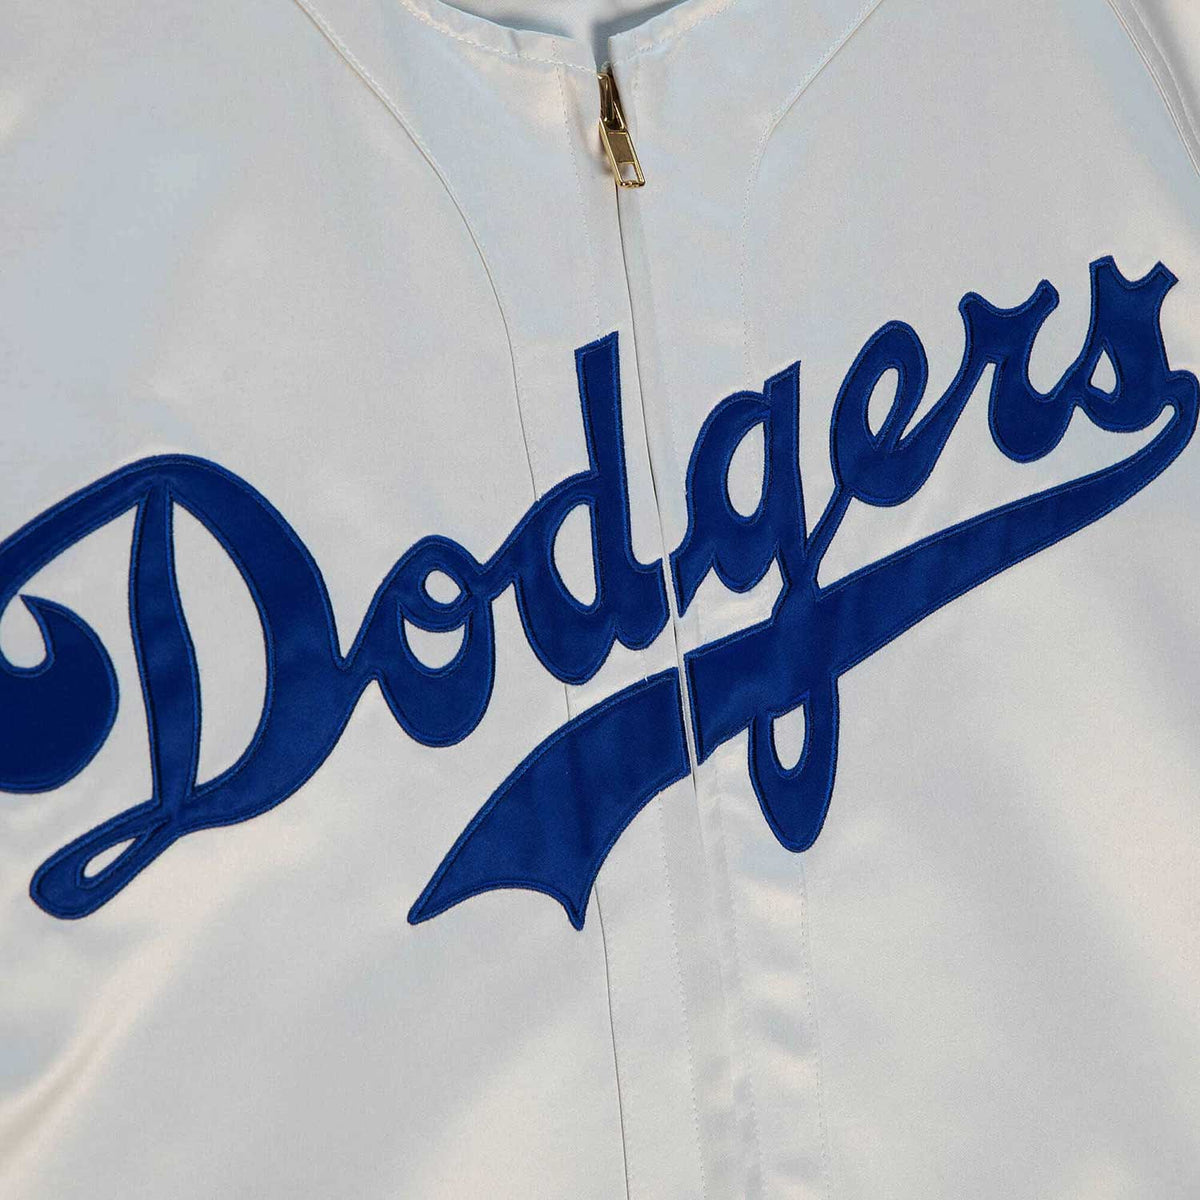 dodgers jersey clearance